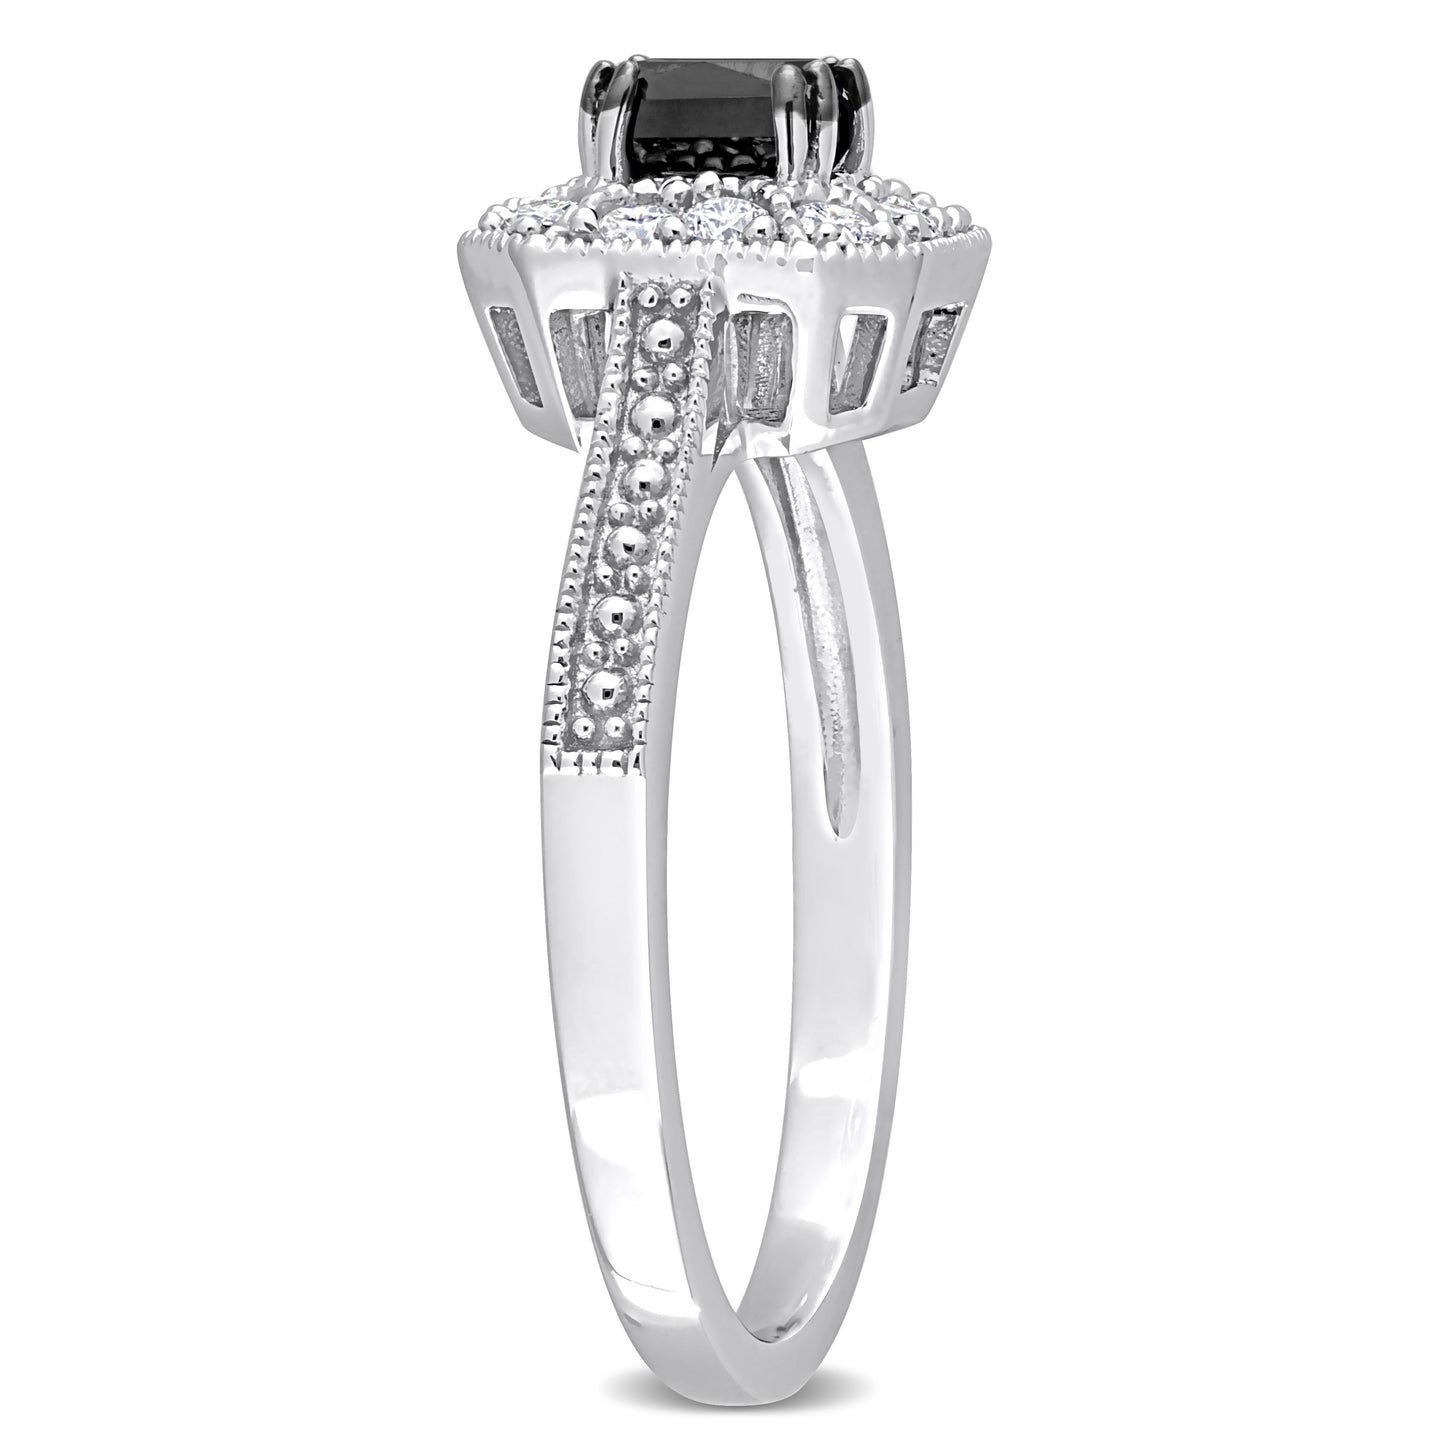 Princess Black and White Halo Diamond Engagement Ring in 10k White Gold